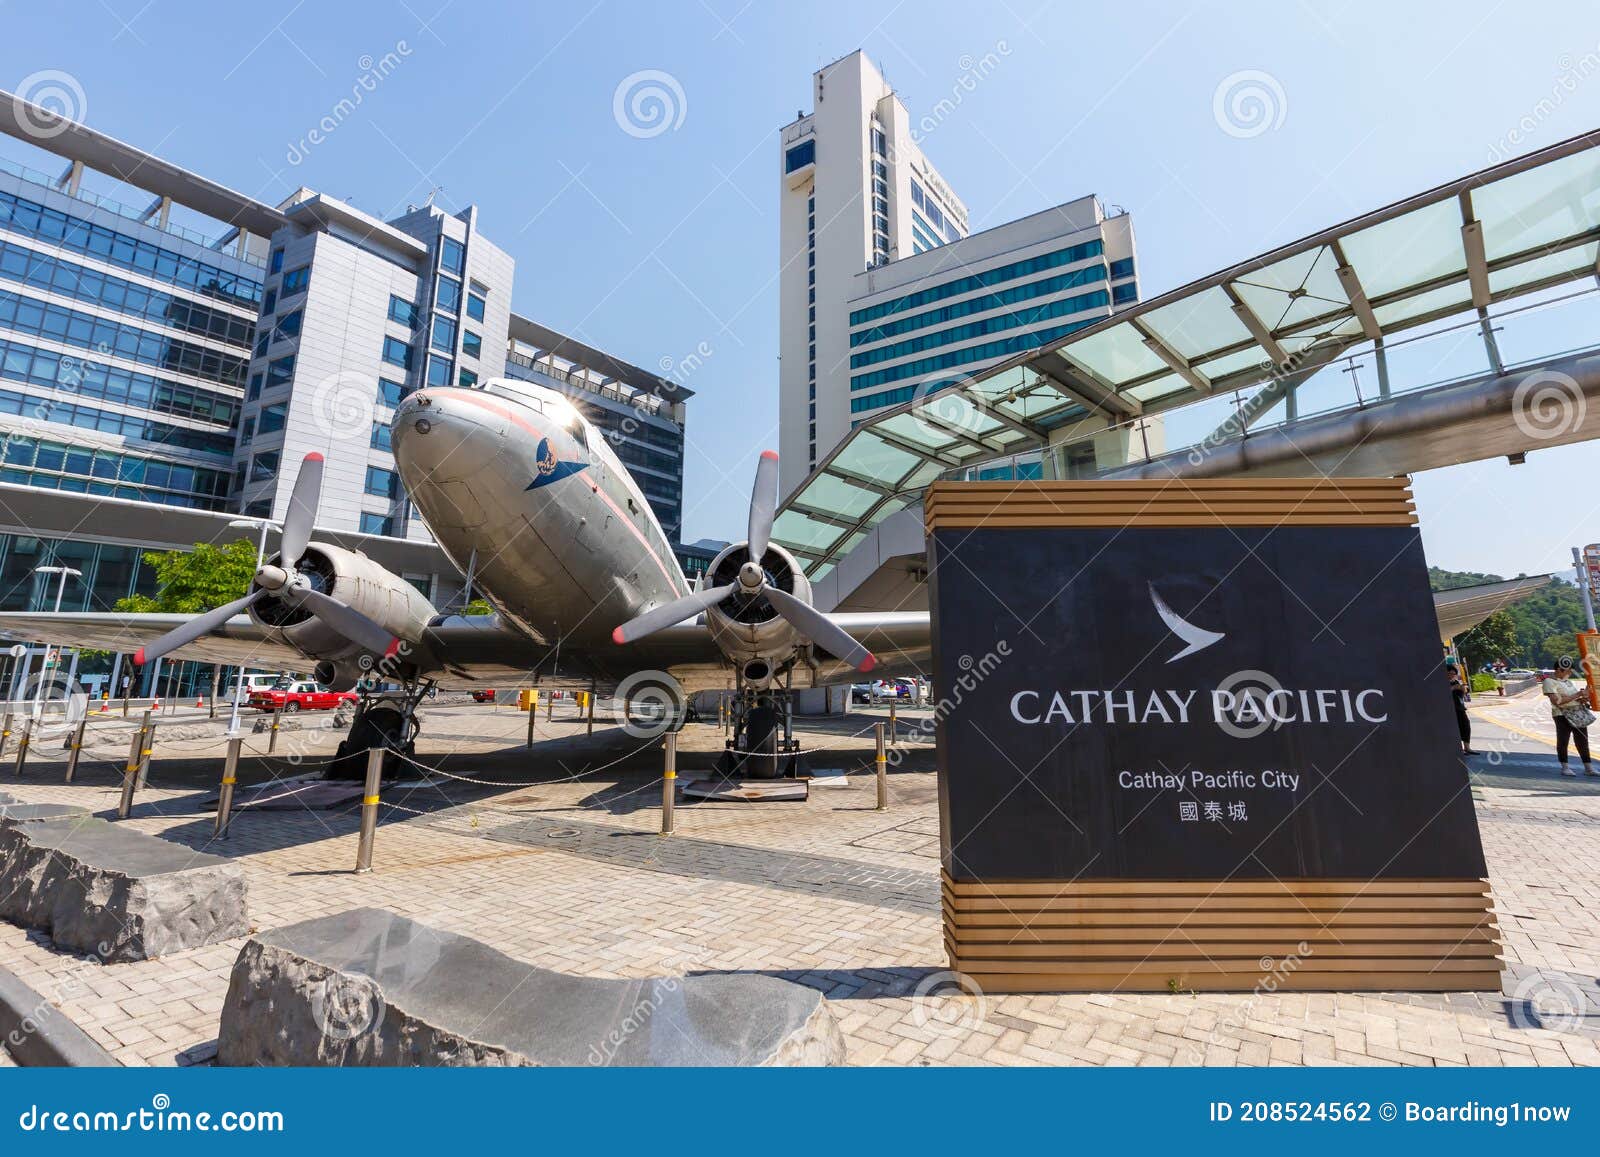 cathay pacific city tour